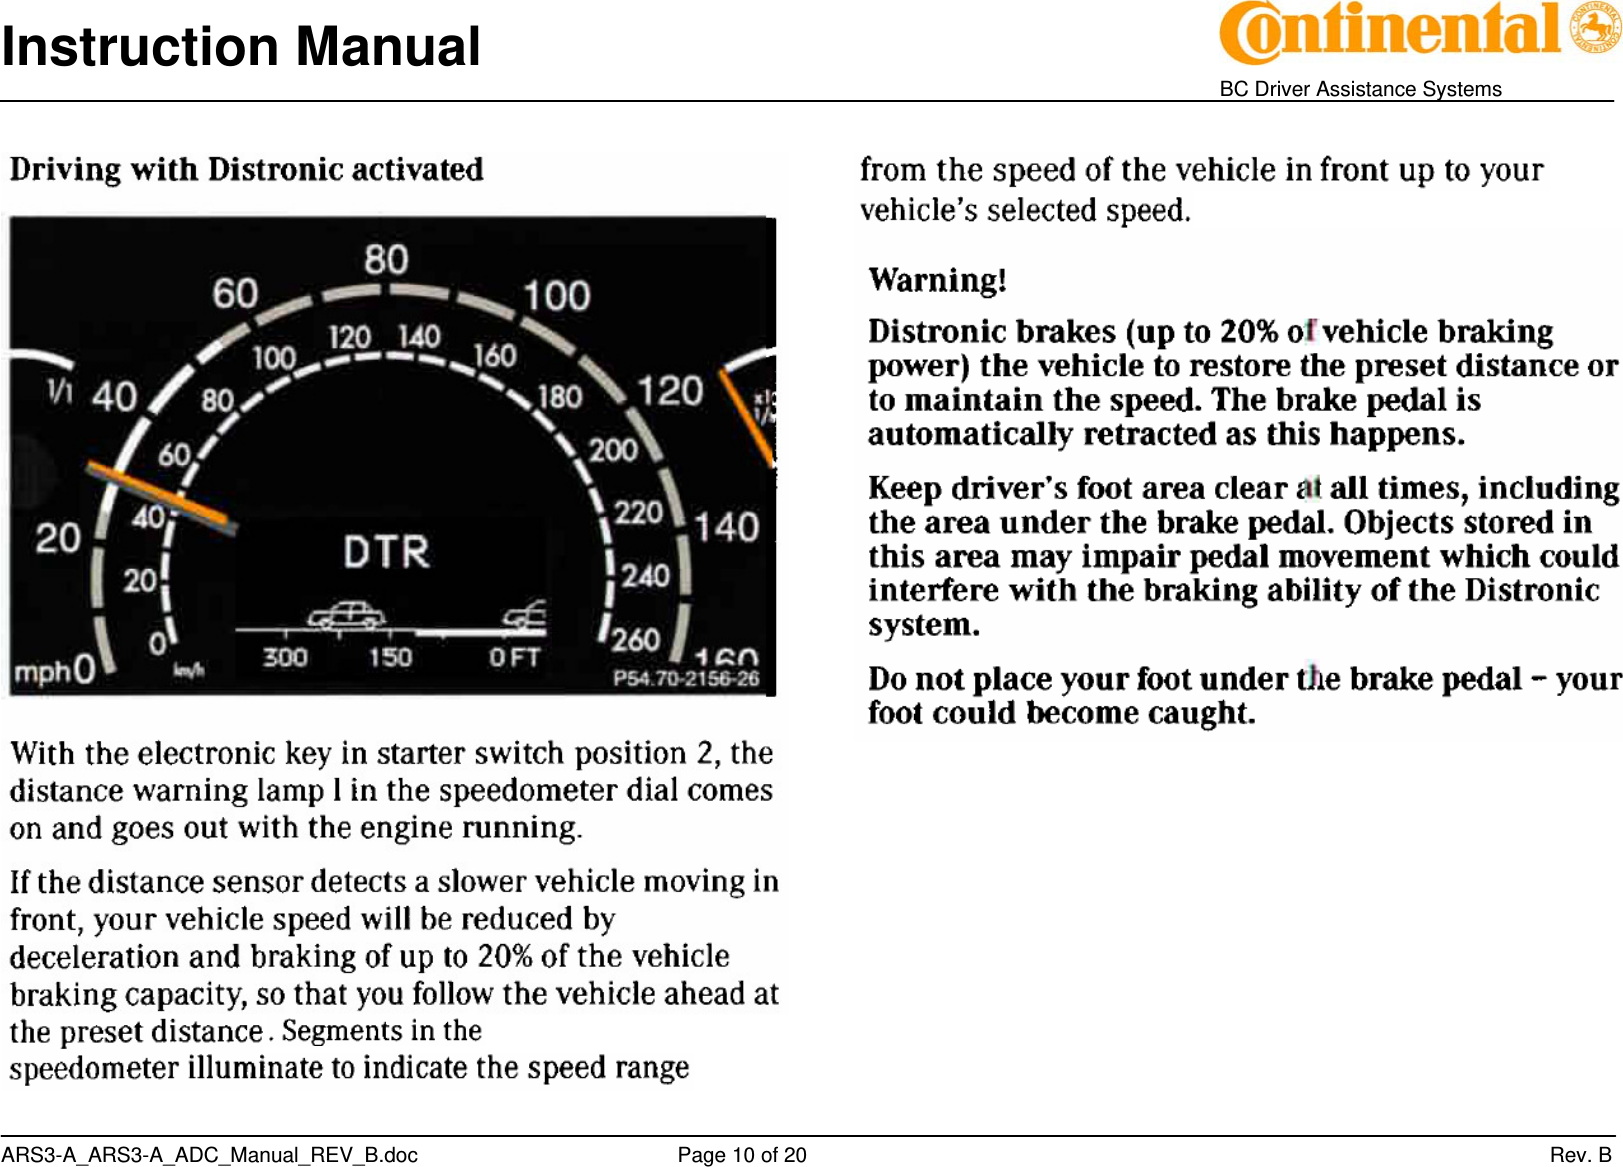 Instruction Manual    BC Driver Assistance Systems ARS3-A_ARS3-A_ADC_Manual_REV_B.doc     Page 10 of 20                 Rev. B       